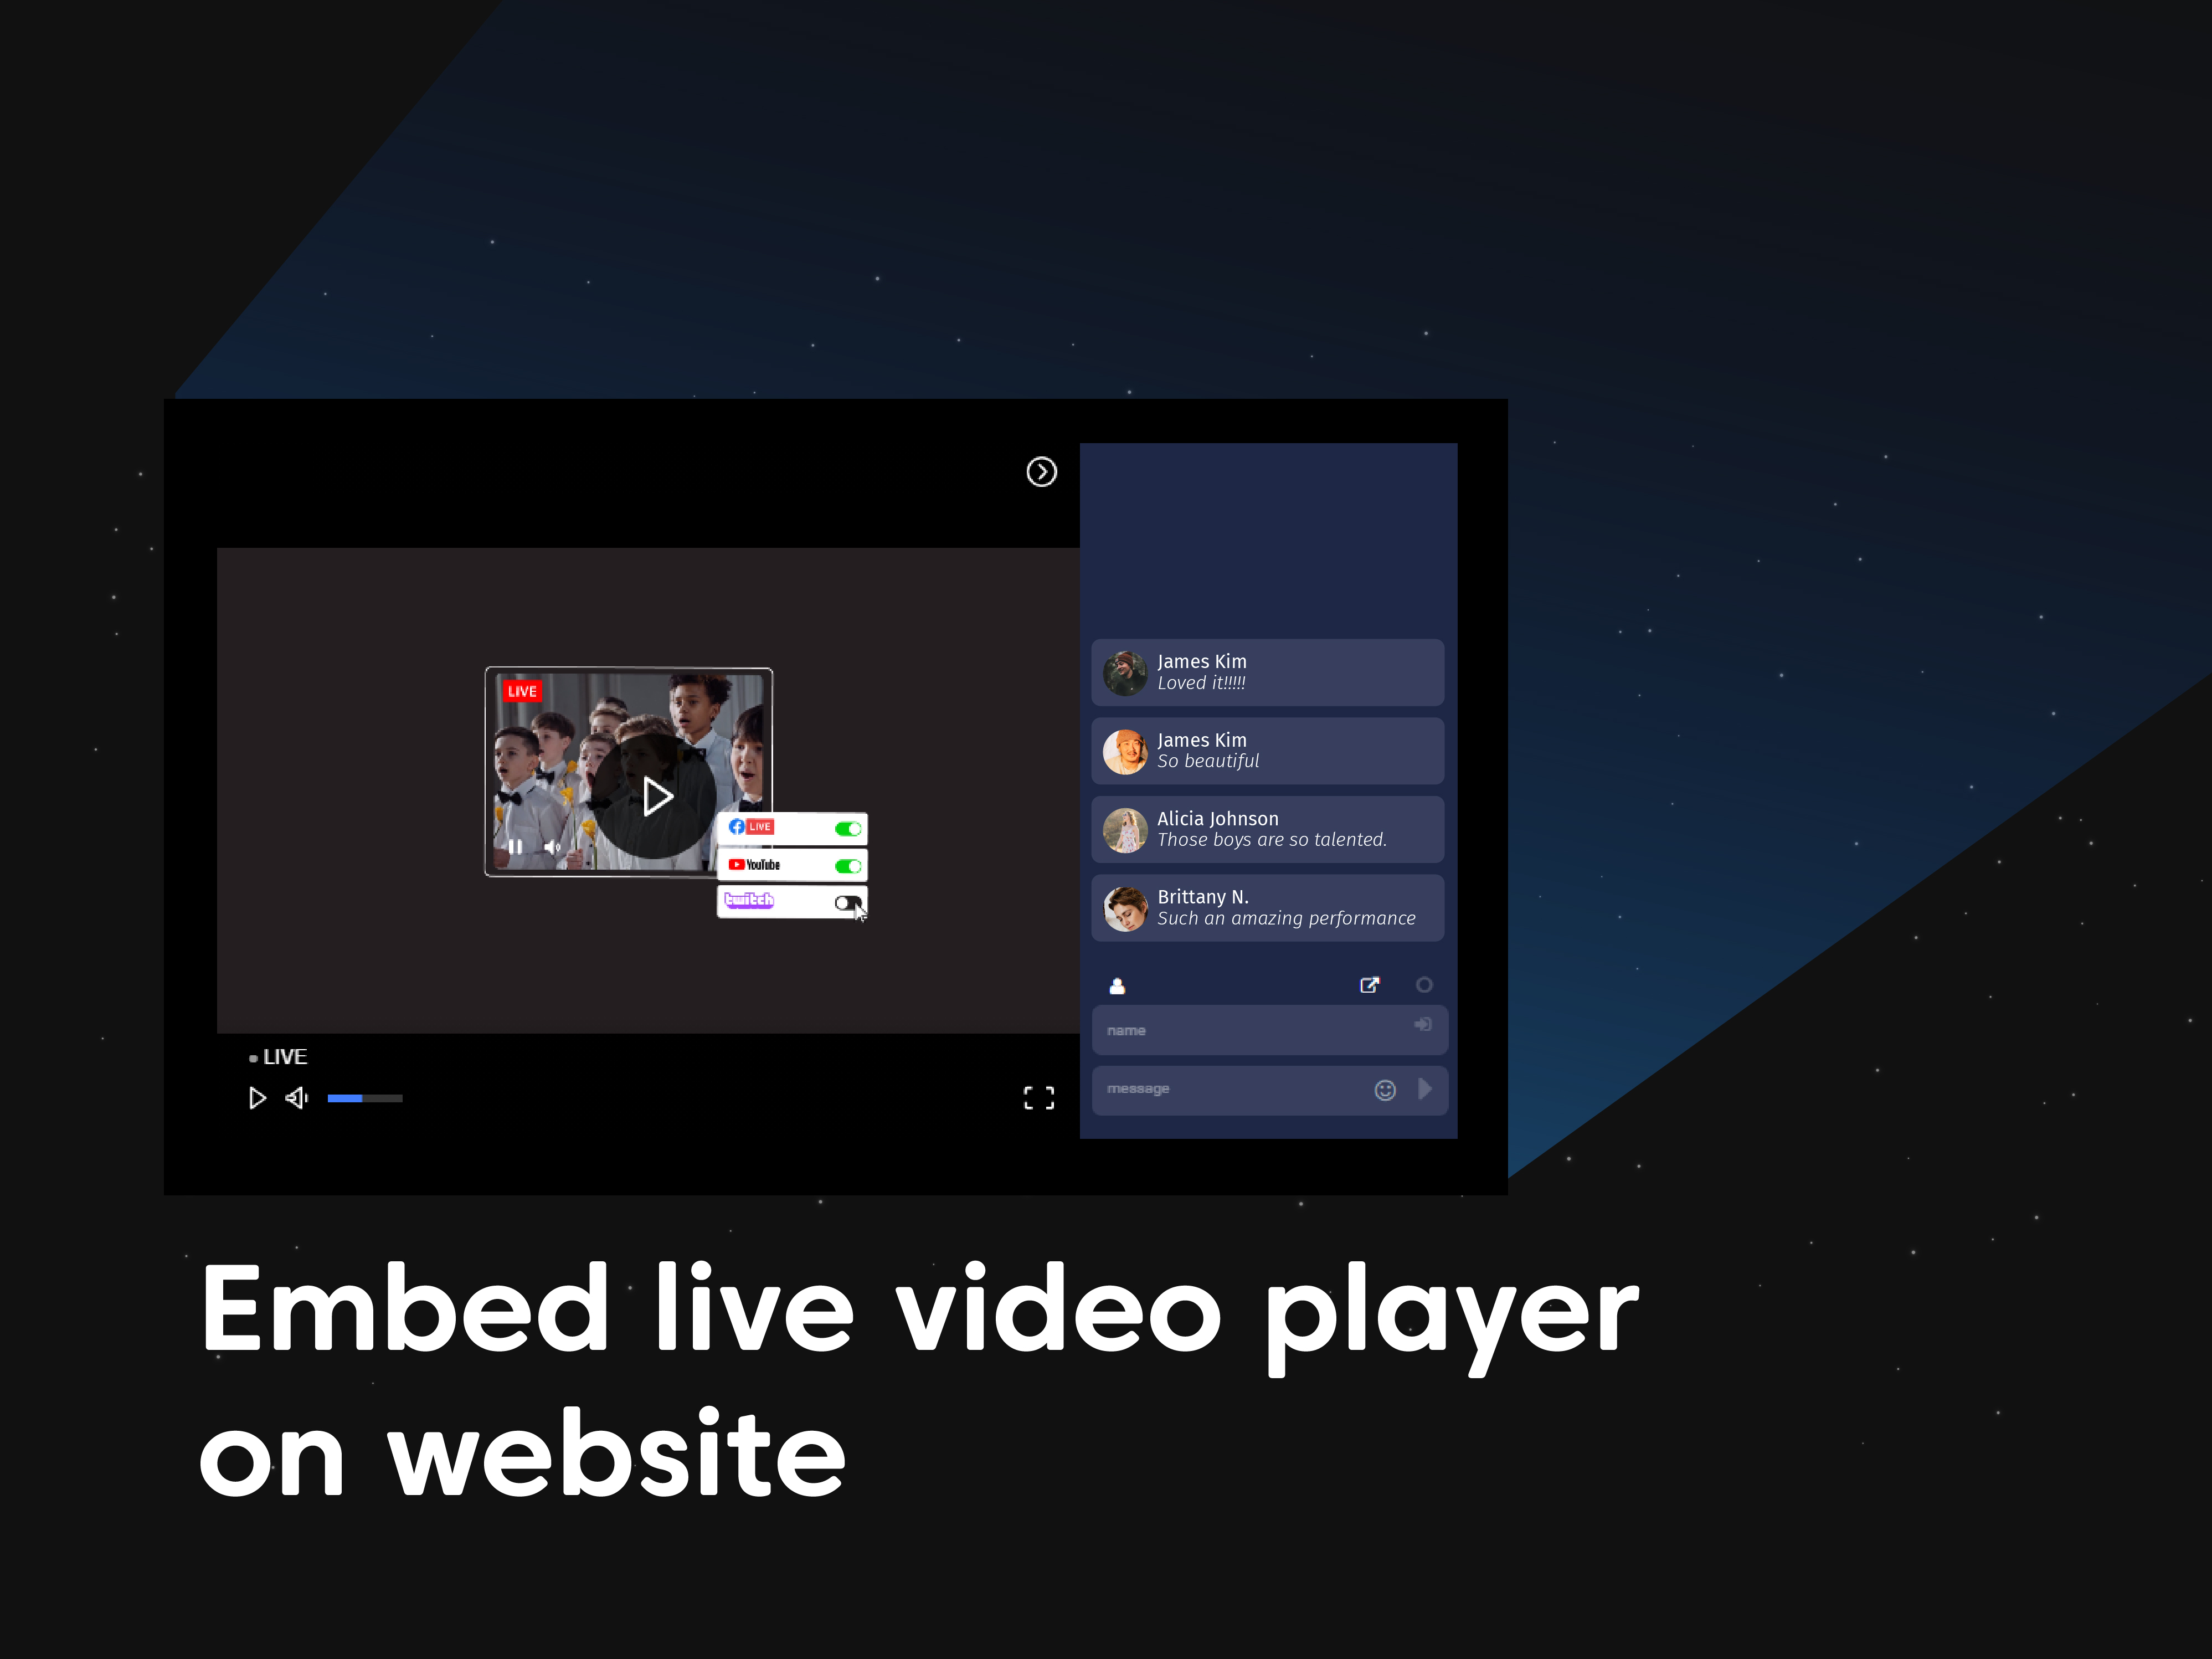 Embeddable live video player on website